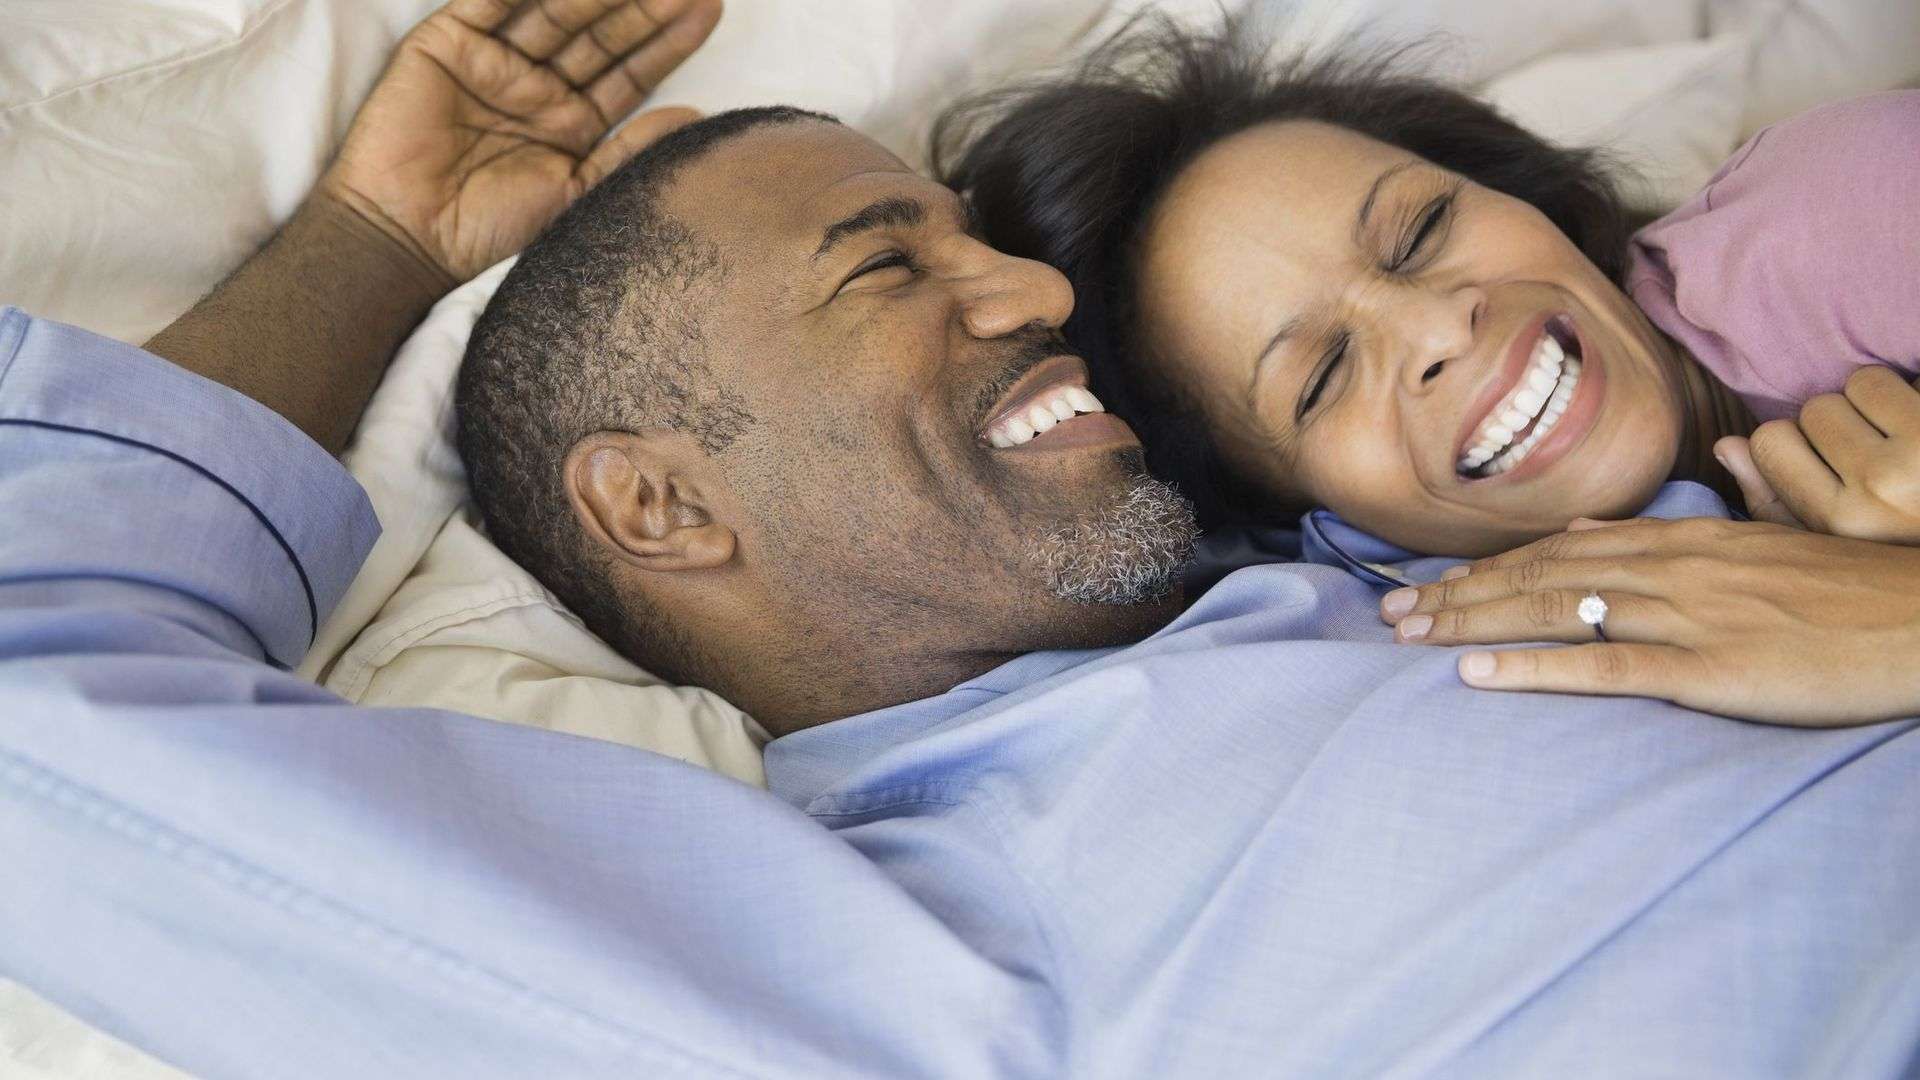 New research claims Sex May Be Good for Older Women, Bad for Older Men